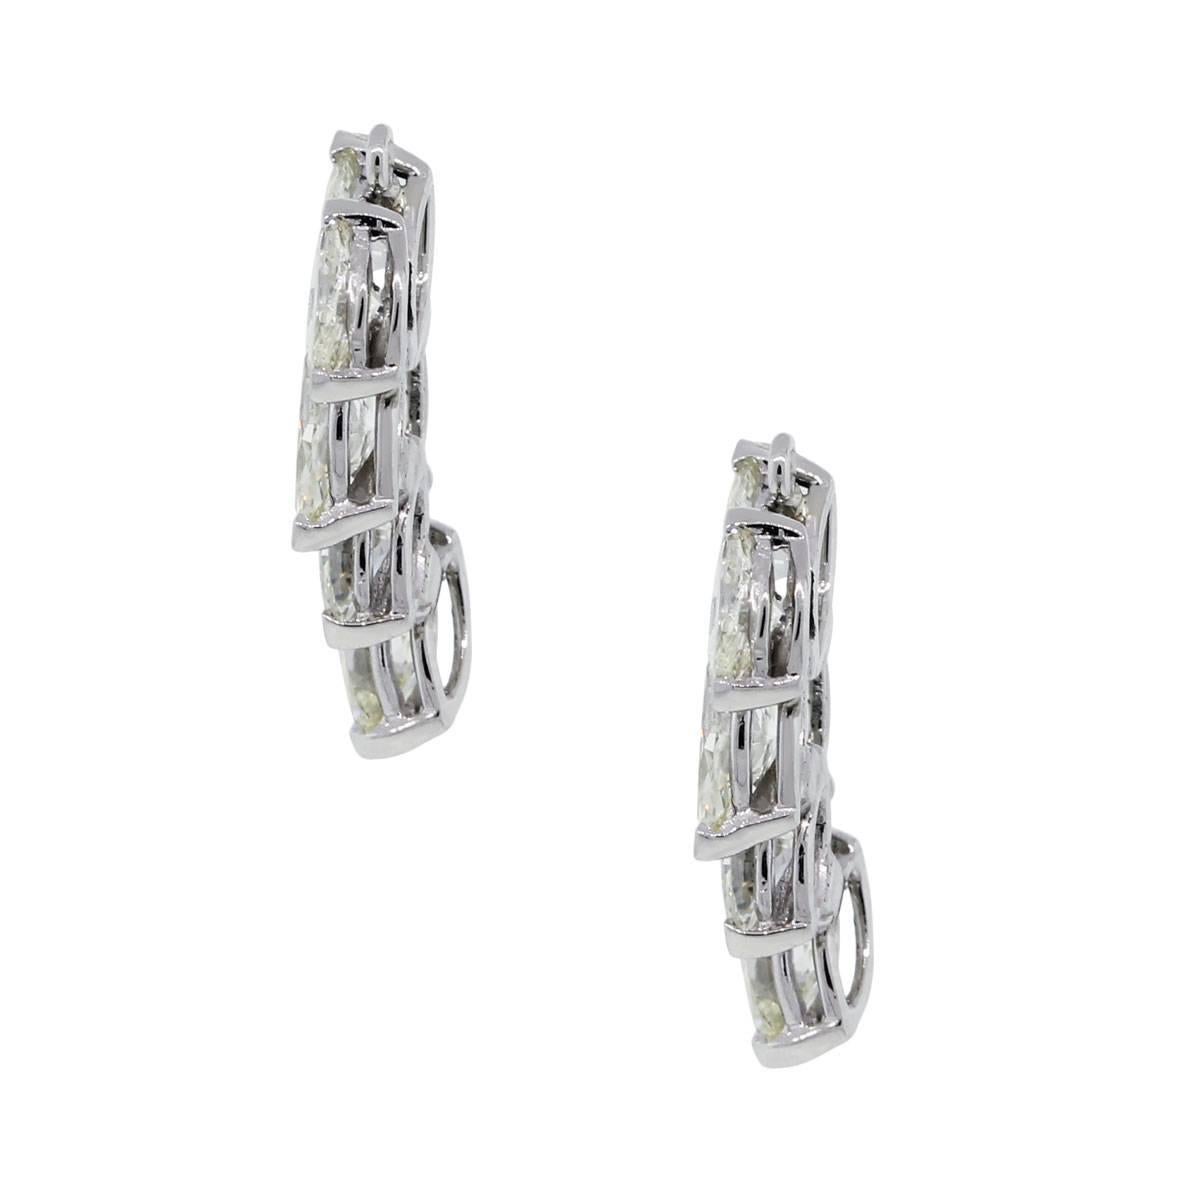 Material: Platinum
Diamond Details: Approximately 6ctw of marquise shape diamonds. Diamonds are I/J in color and VS in clarity.
Measurements: 0.88″ x 0.20″ x 0.51″
Clasp: Earring jackets
Total Weight: 6.4g (4.1dwt)
Additional details: Item comes